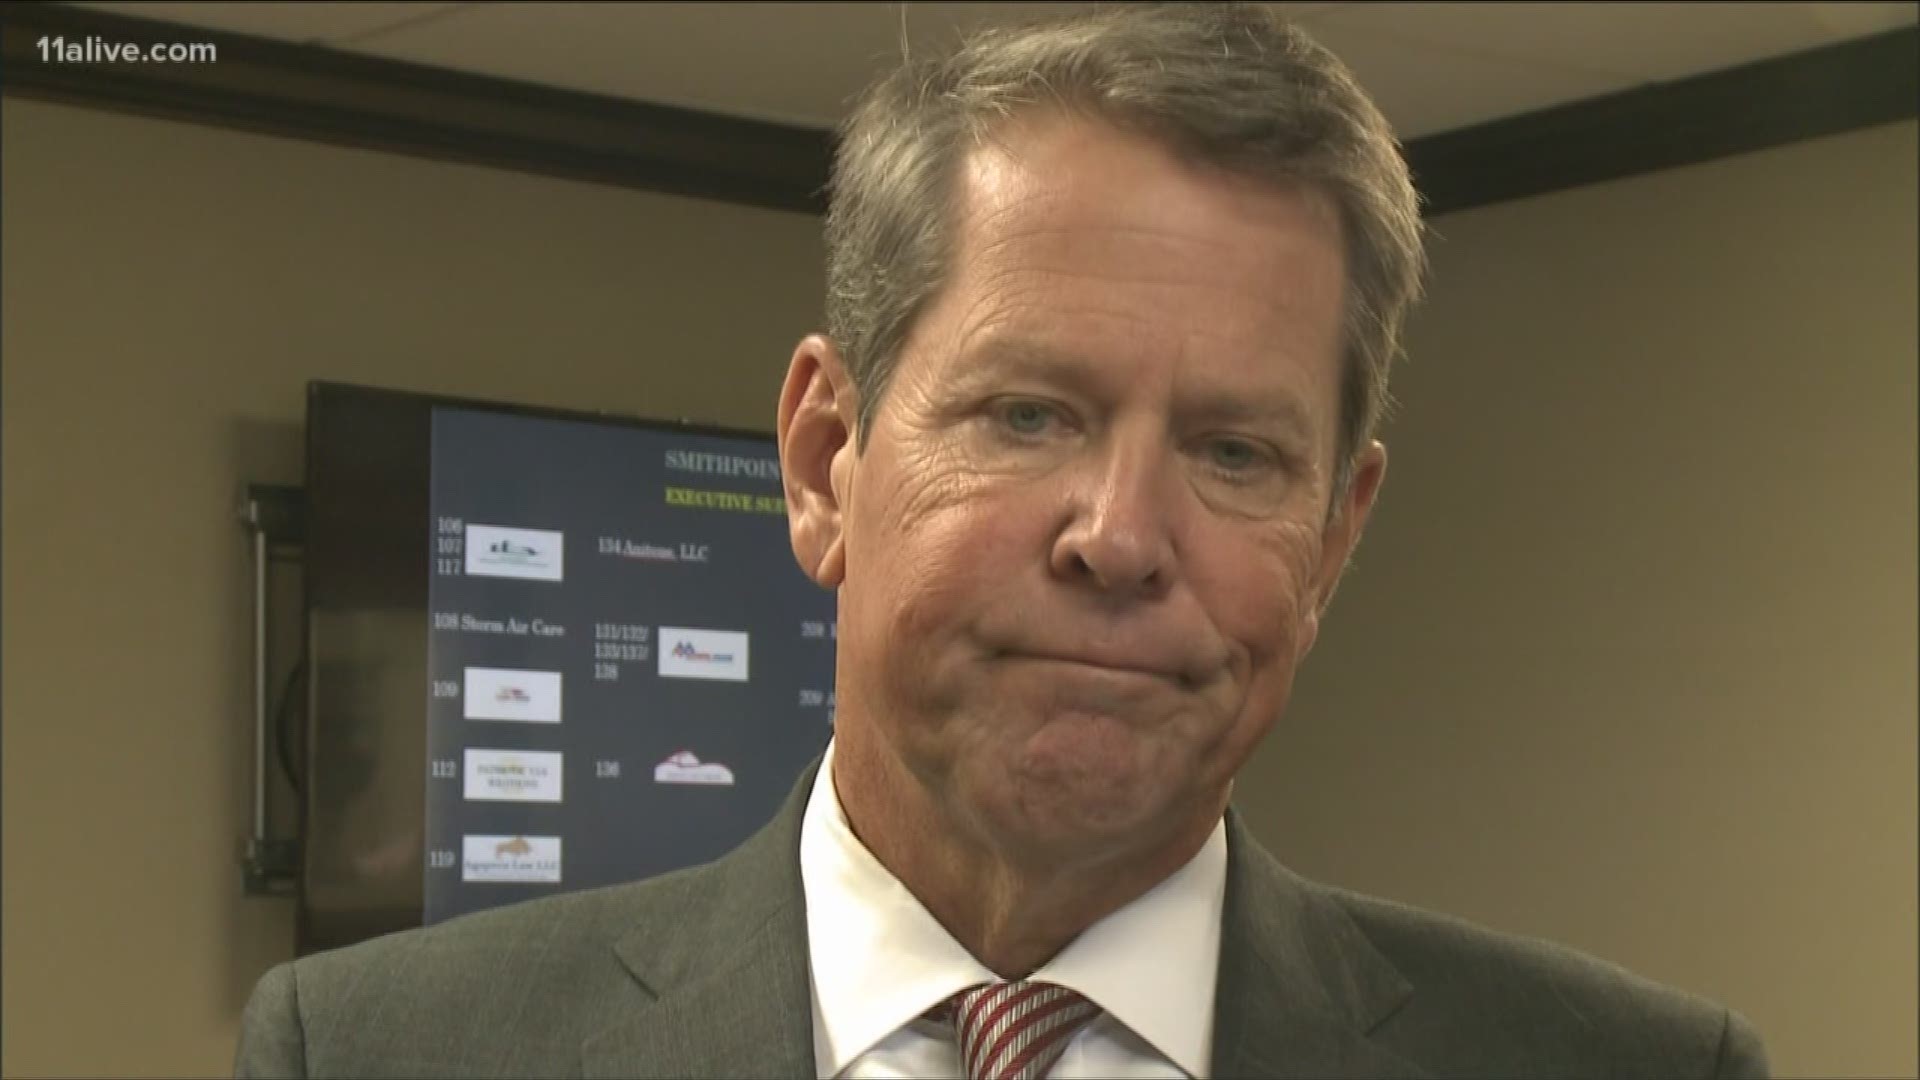 Kemp says he is not focused on closing the companies right now, but he is reviewing other options.